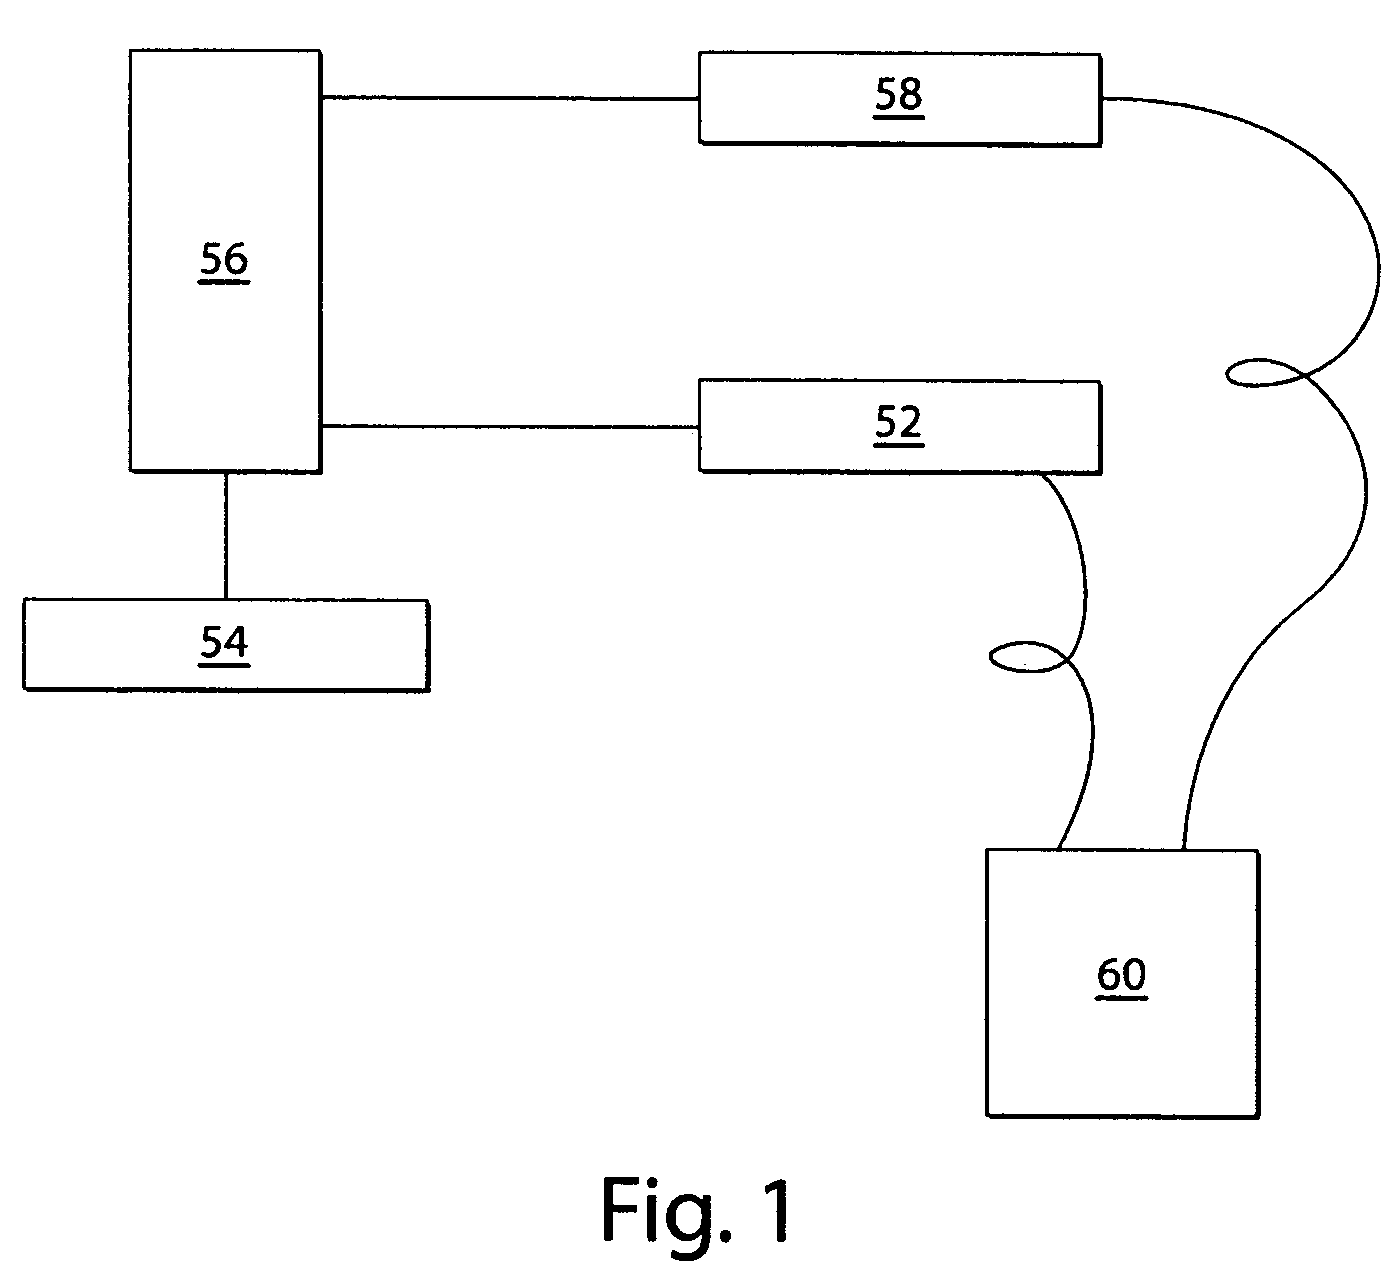 Systems and methods for detecting and analyzing polymers